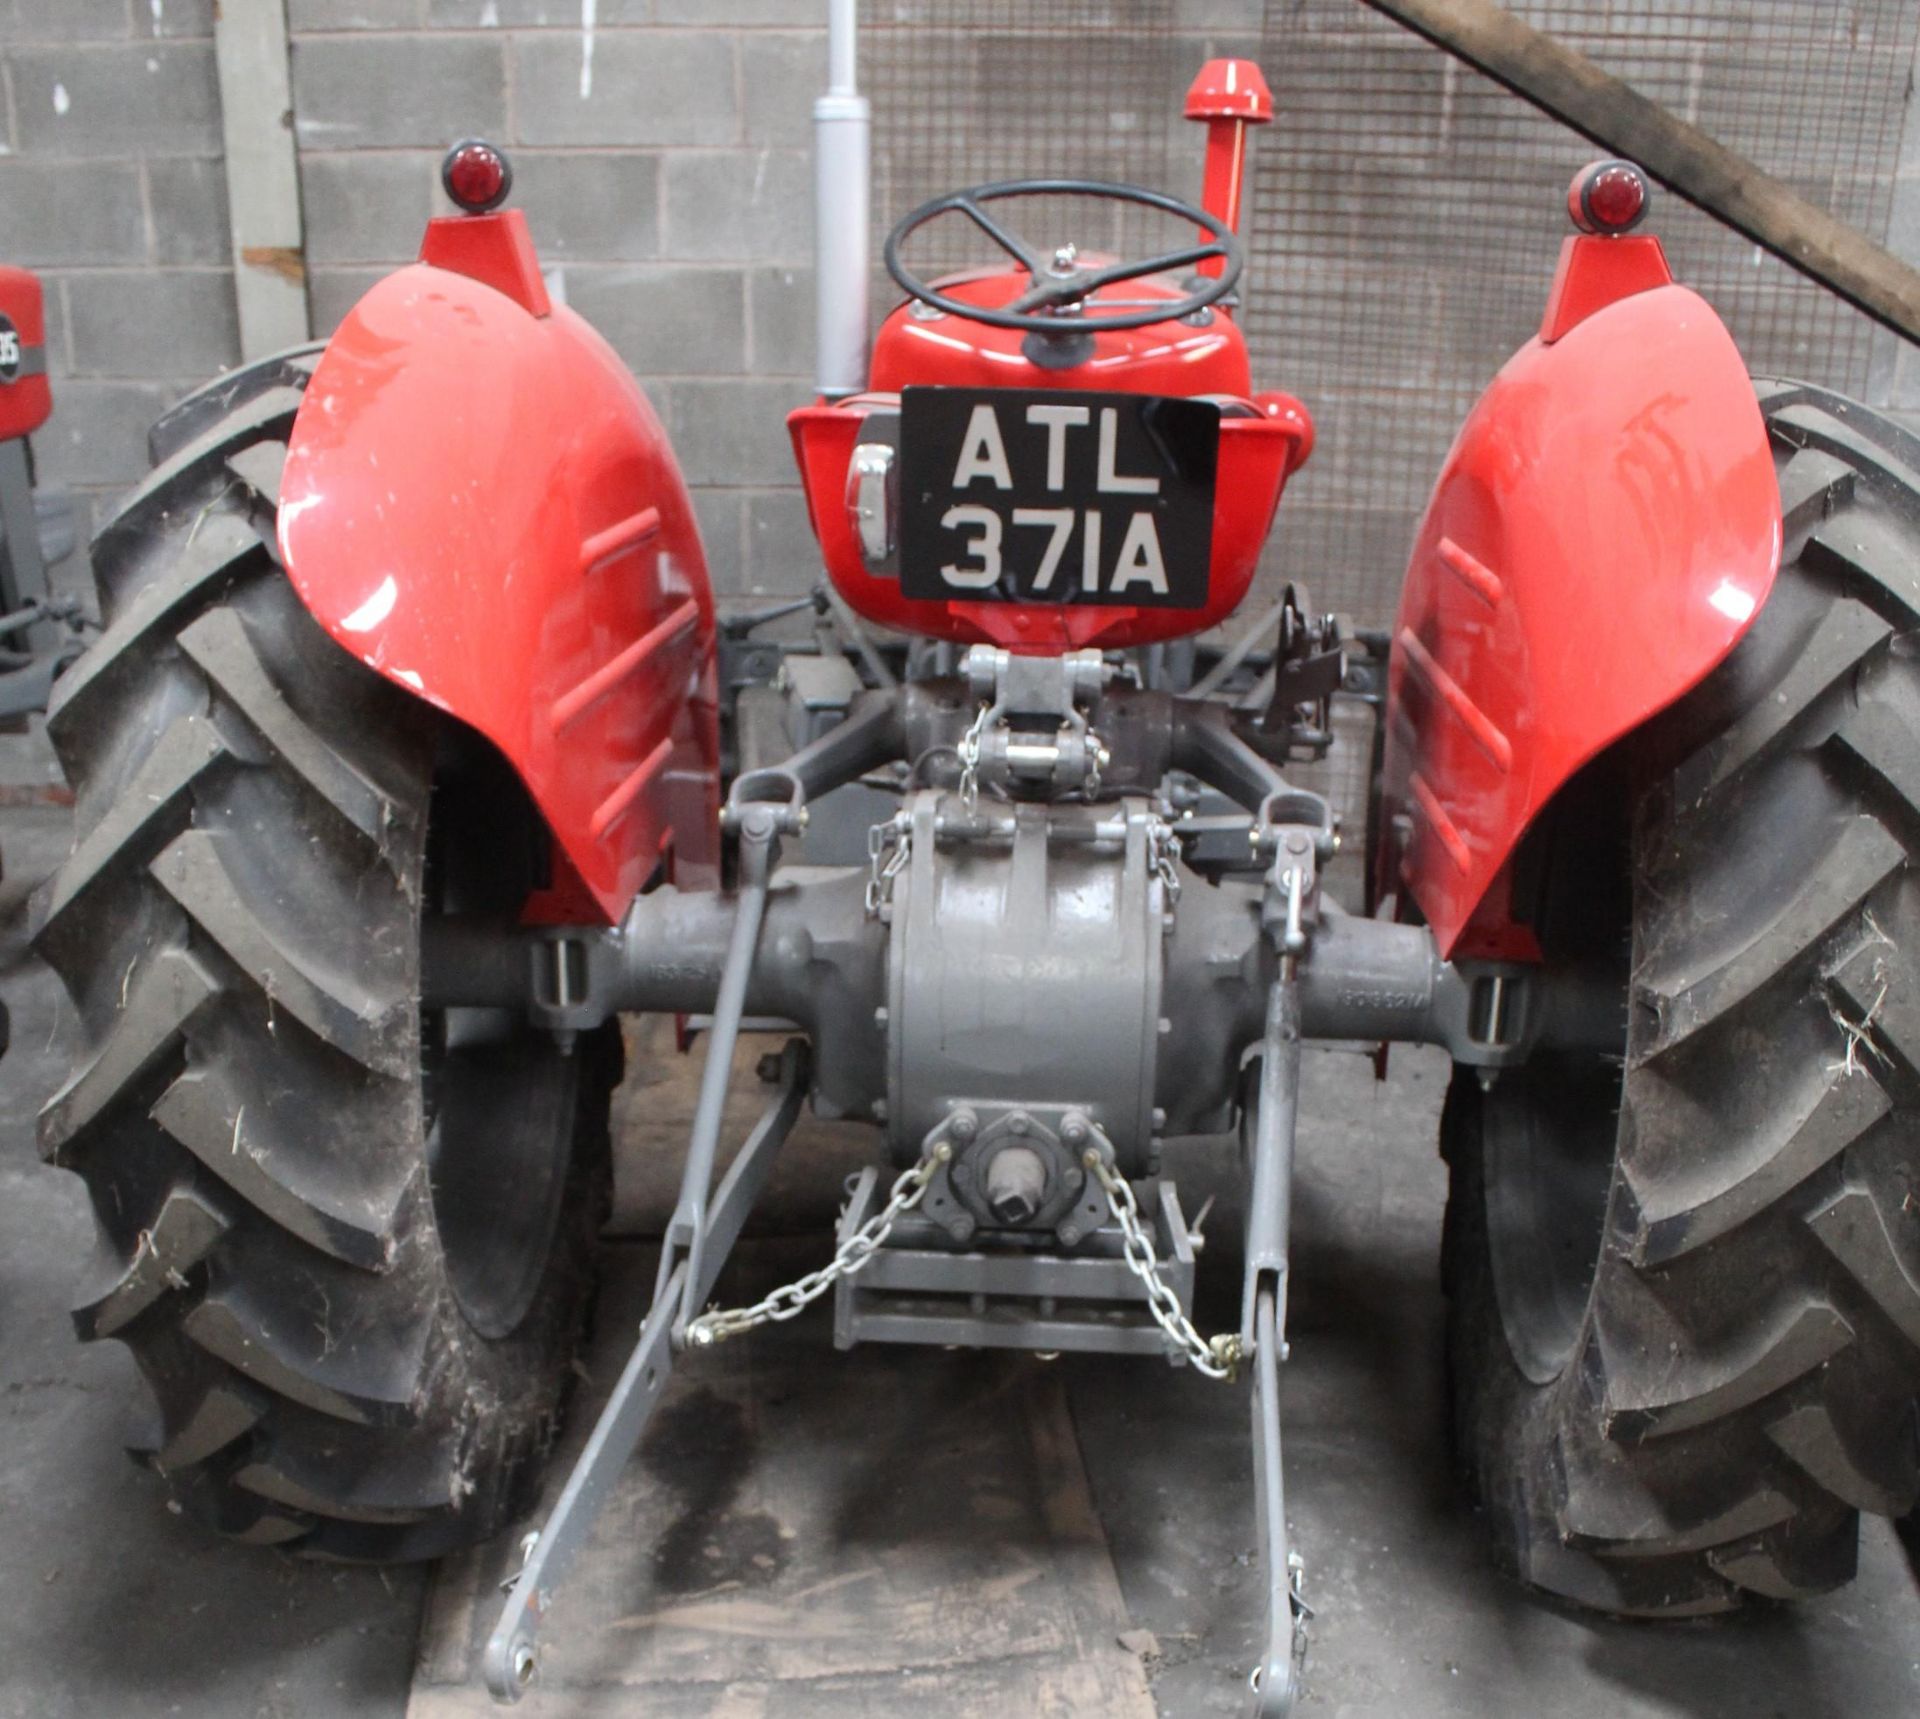 A MASSEY FERGUSON 35X TRACTOR, REGISTRATION NO. ATL 371A AND WITH A NEW BATTERY + LOG BOOK - Image 5 of 7